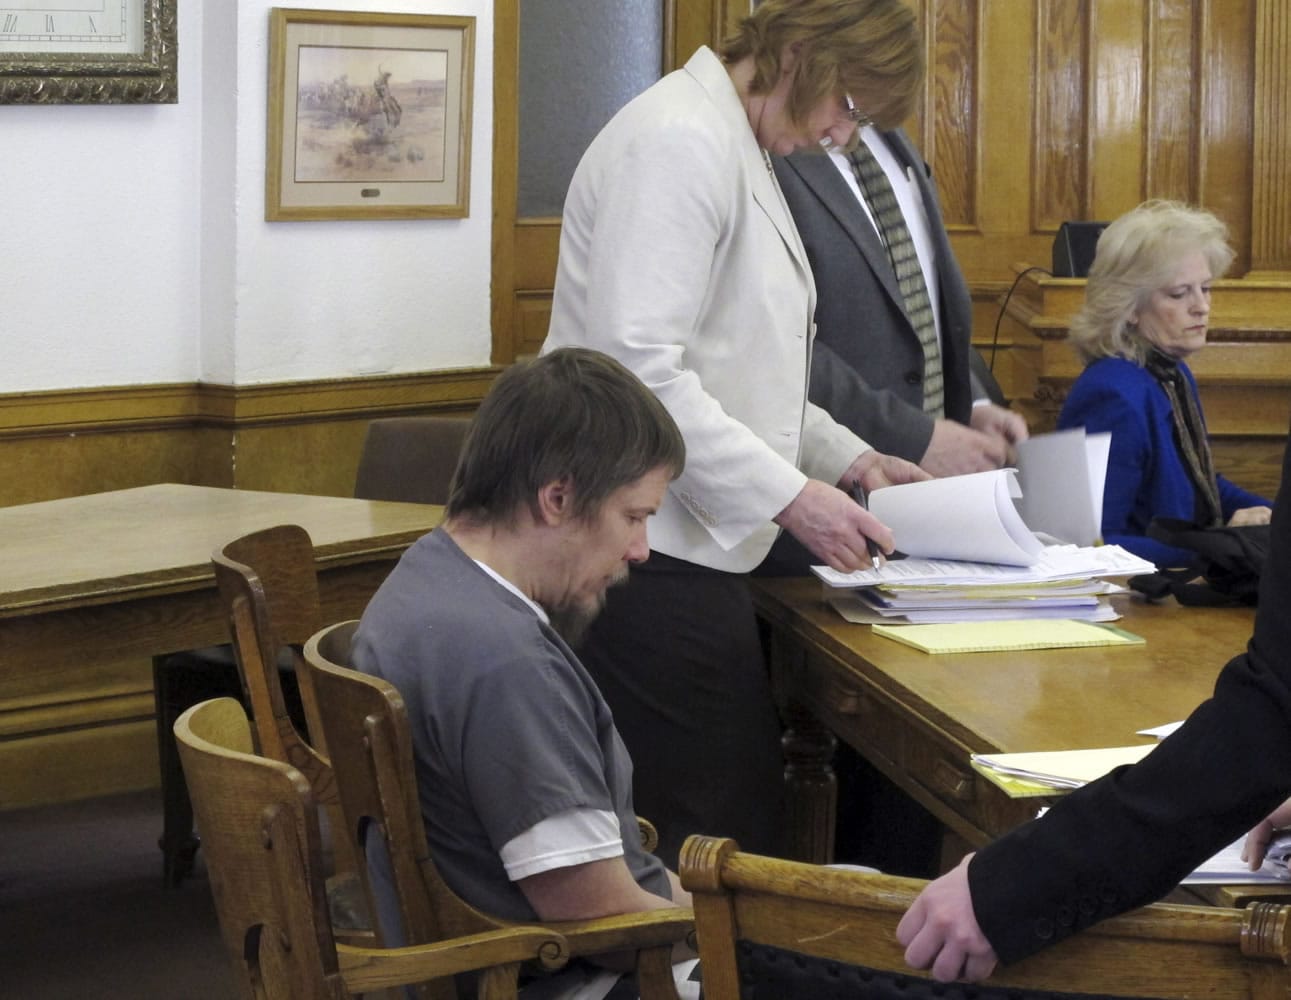 Jeremy Cramer, 38, sits in court in Anaconda, Mont., after a judge sentenced him on Friday, April 4, 2014, to life in prison without parole.